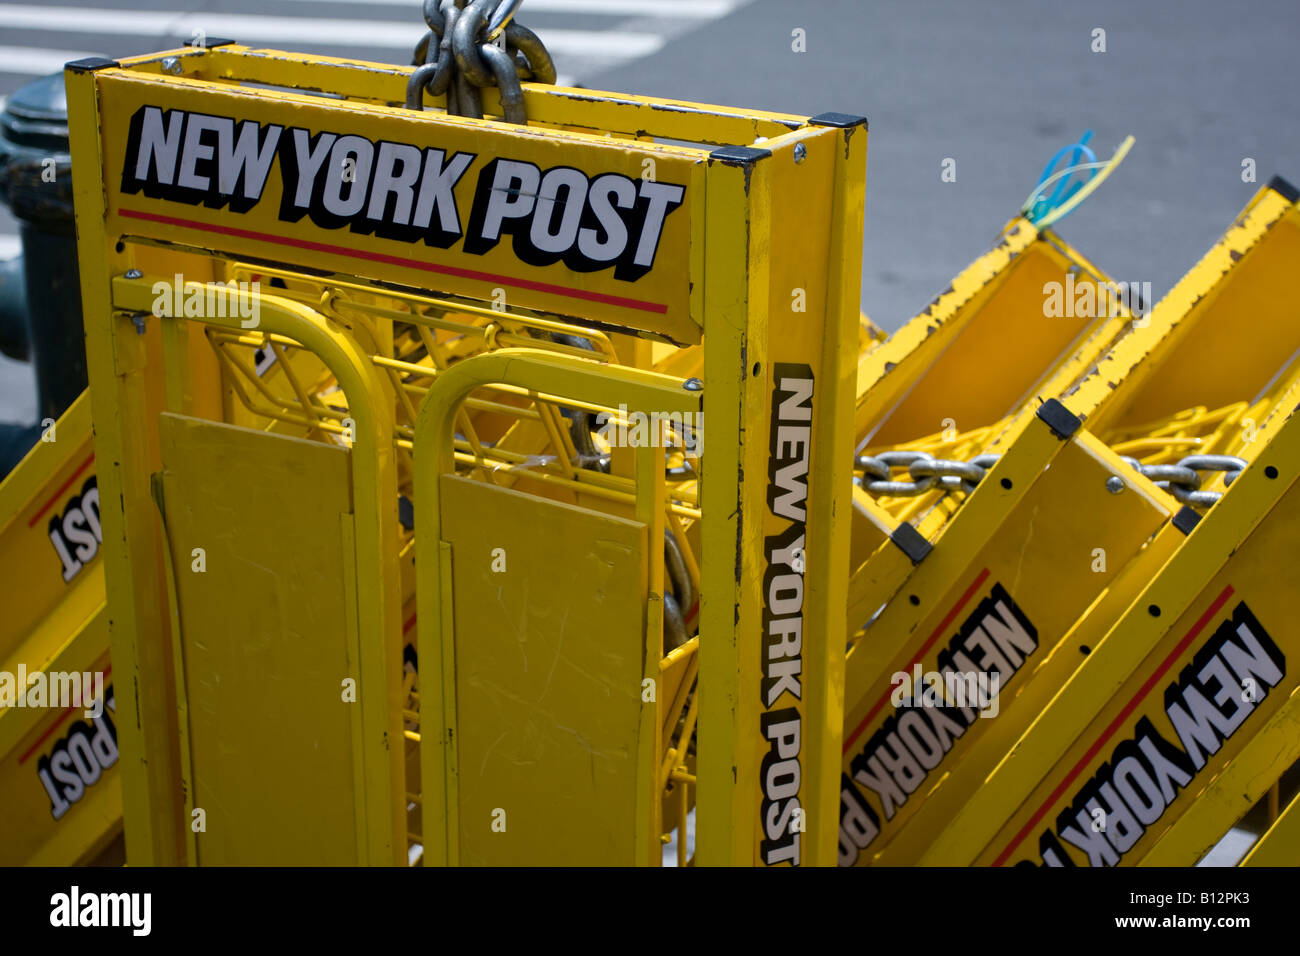 New York Post paper deliver carts Stock Photo